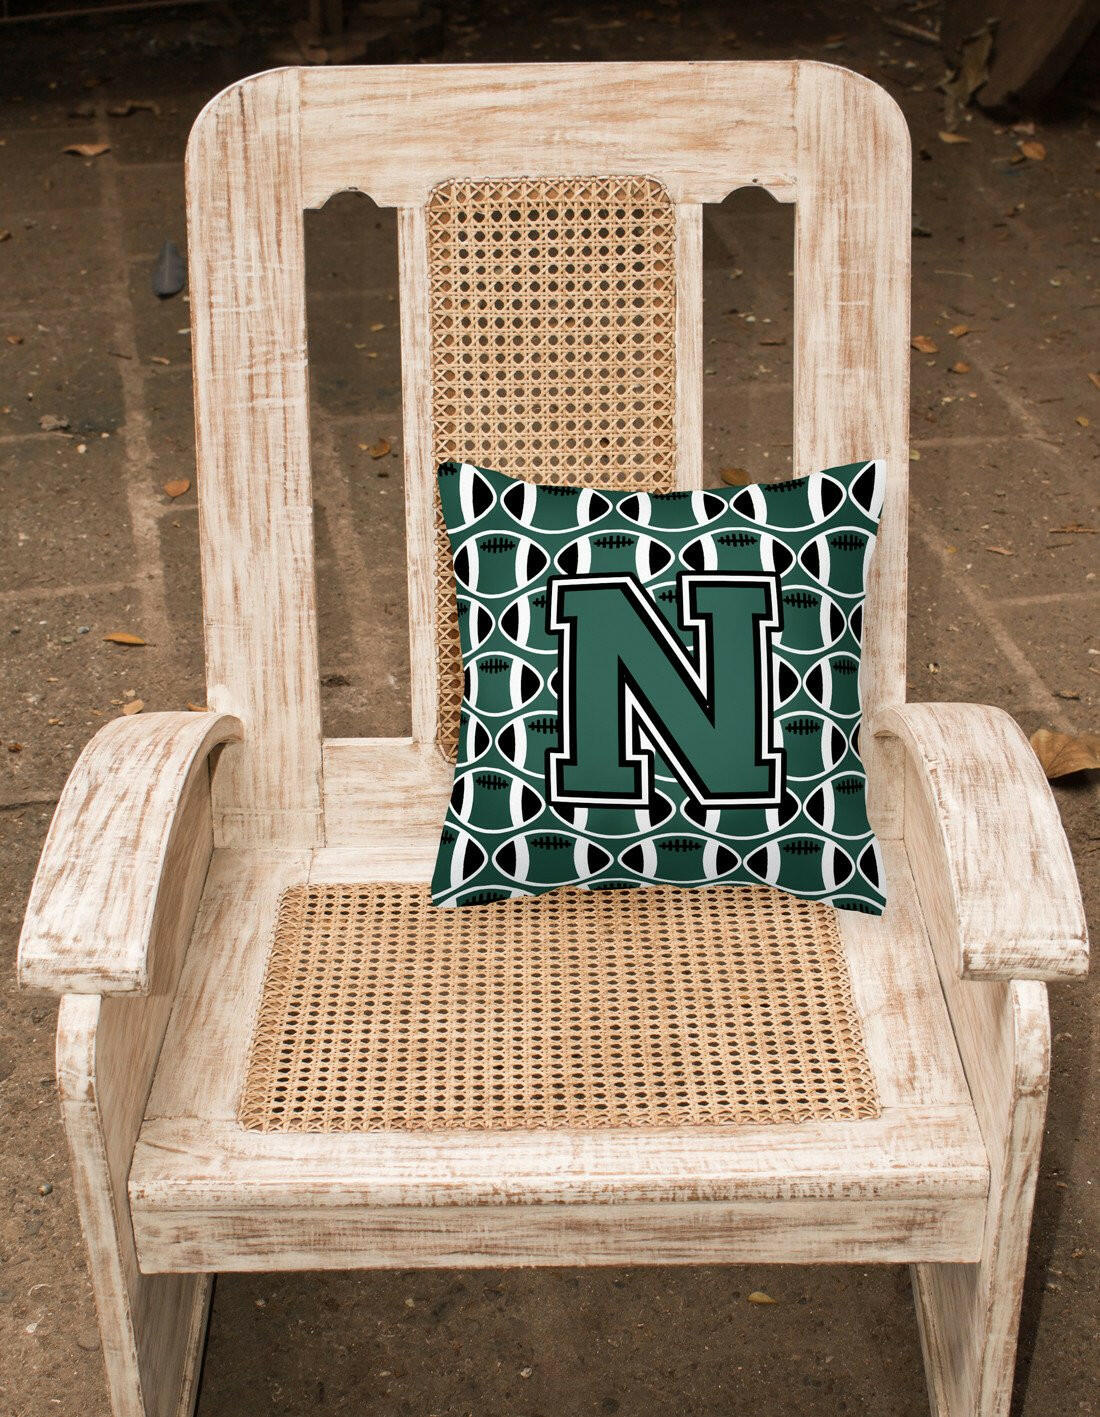 Letter N Football Green and White Fabric Decorative Pillow CJ1071-NPW1414 by Caroline's Treasures